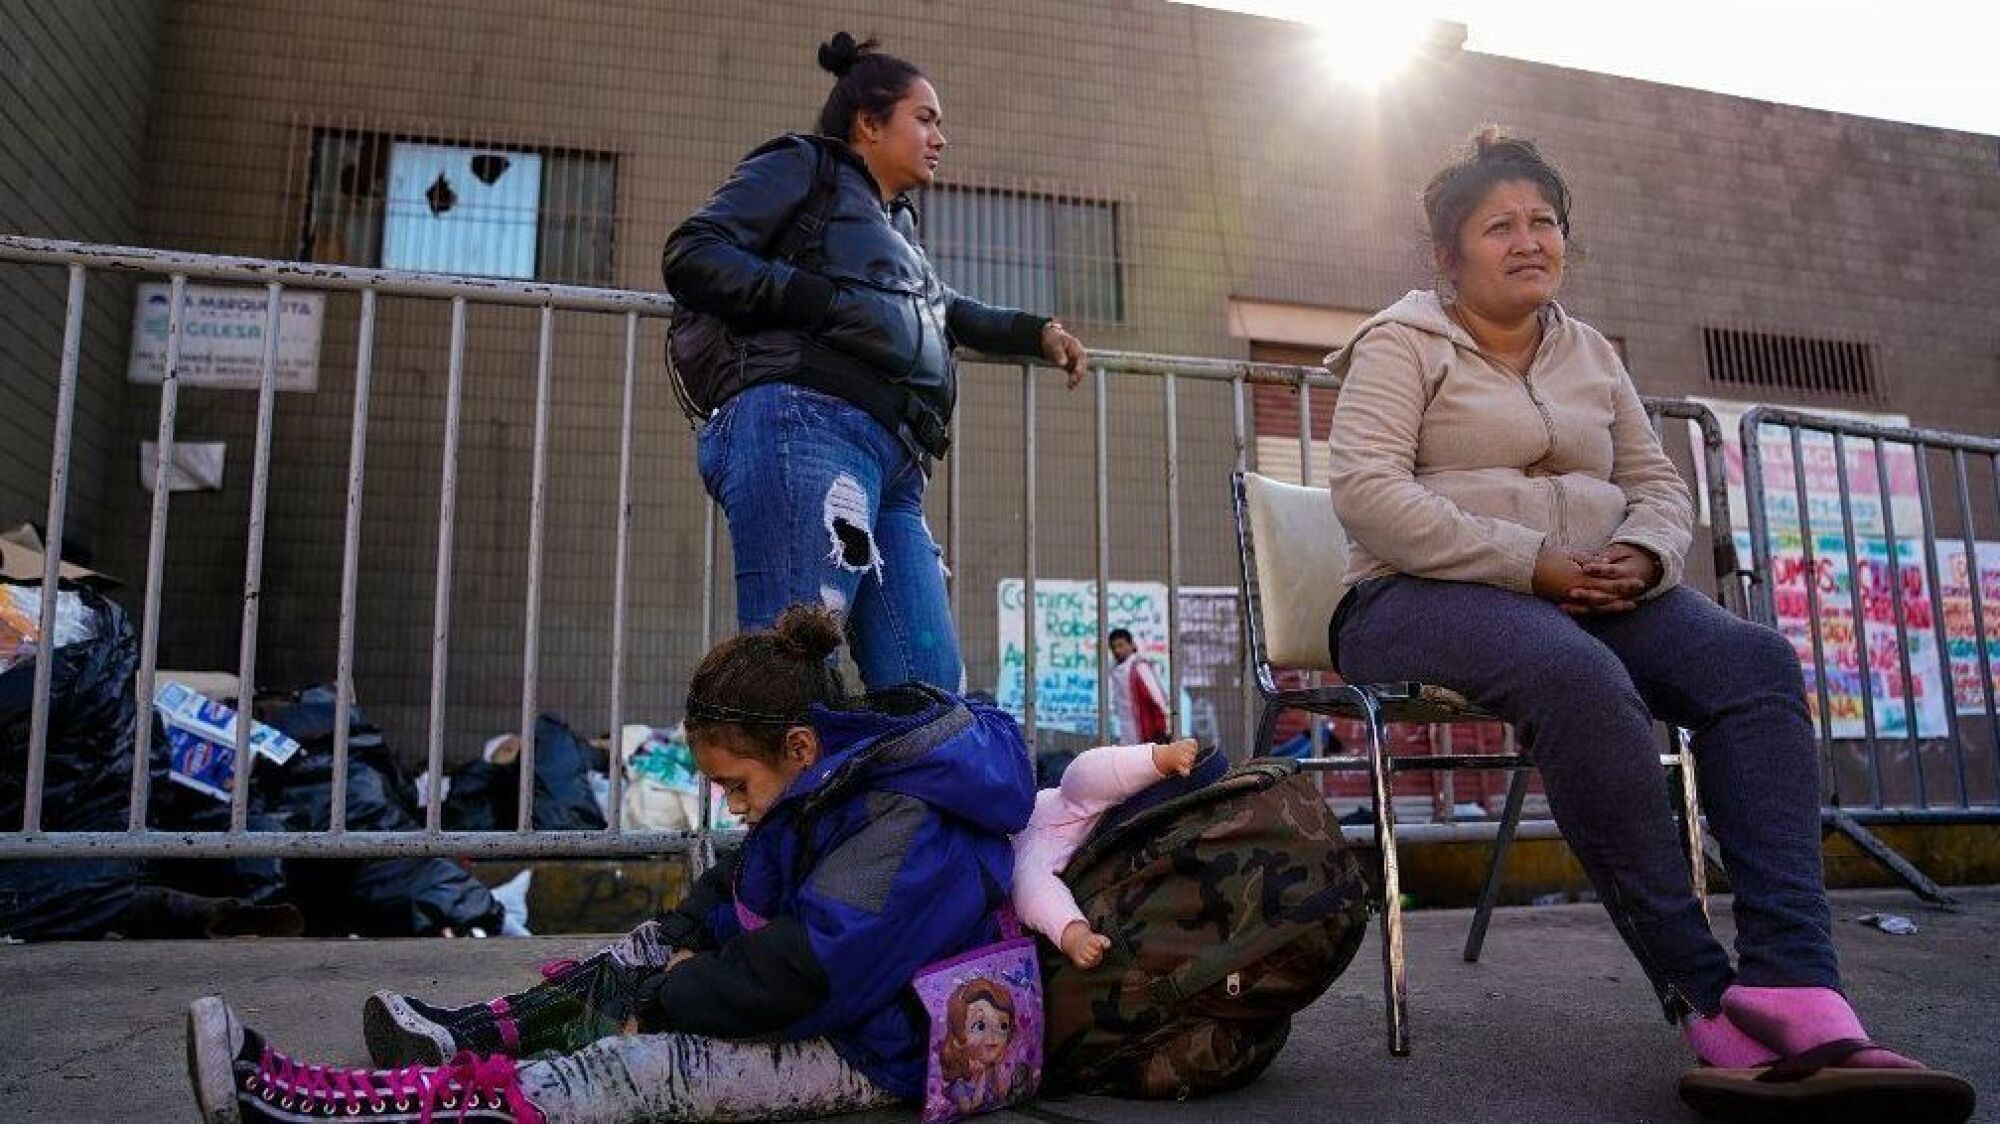 A woman and young girl sit while another woman stands, all three waiting by the port of entry to ask for asylum